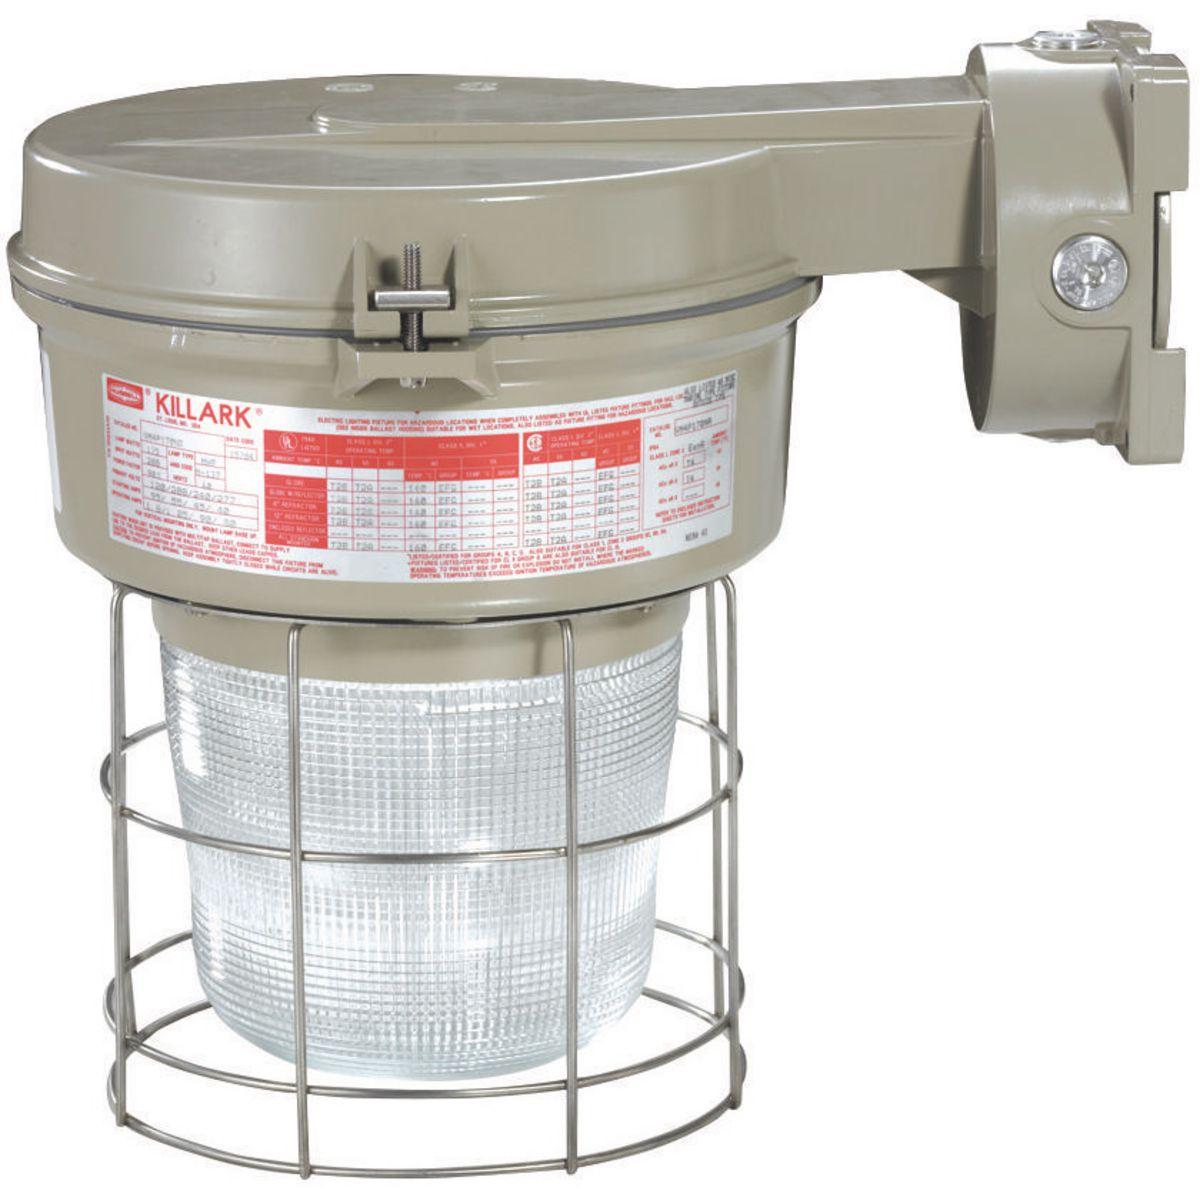 Hubbell VM4P150B2R1G VM4 Series - 150W Metal Halide Quadri-Volt - 3/4" Wall Mount - Type I Glass Refractor and Guard  ; Ballast tank and splice box – corrosion resistant copper-free aluminum alloy with baked powder epoxy/polyester finish, electrostatically applied for complet